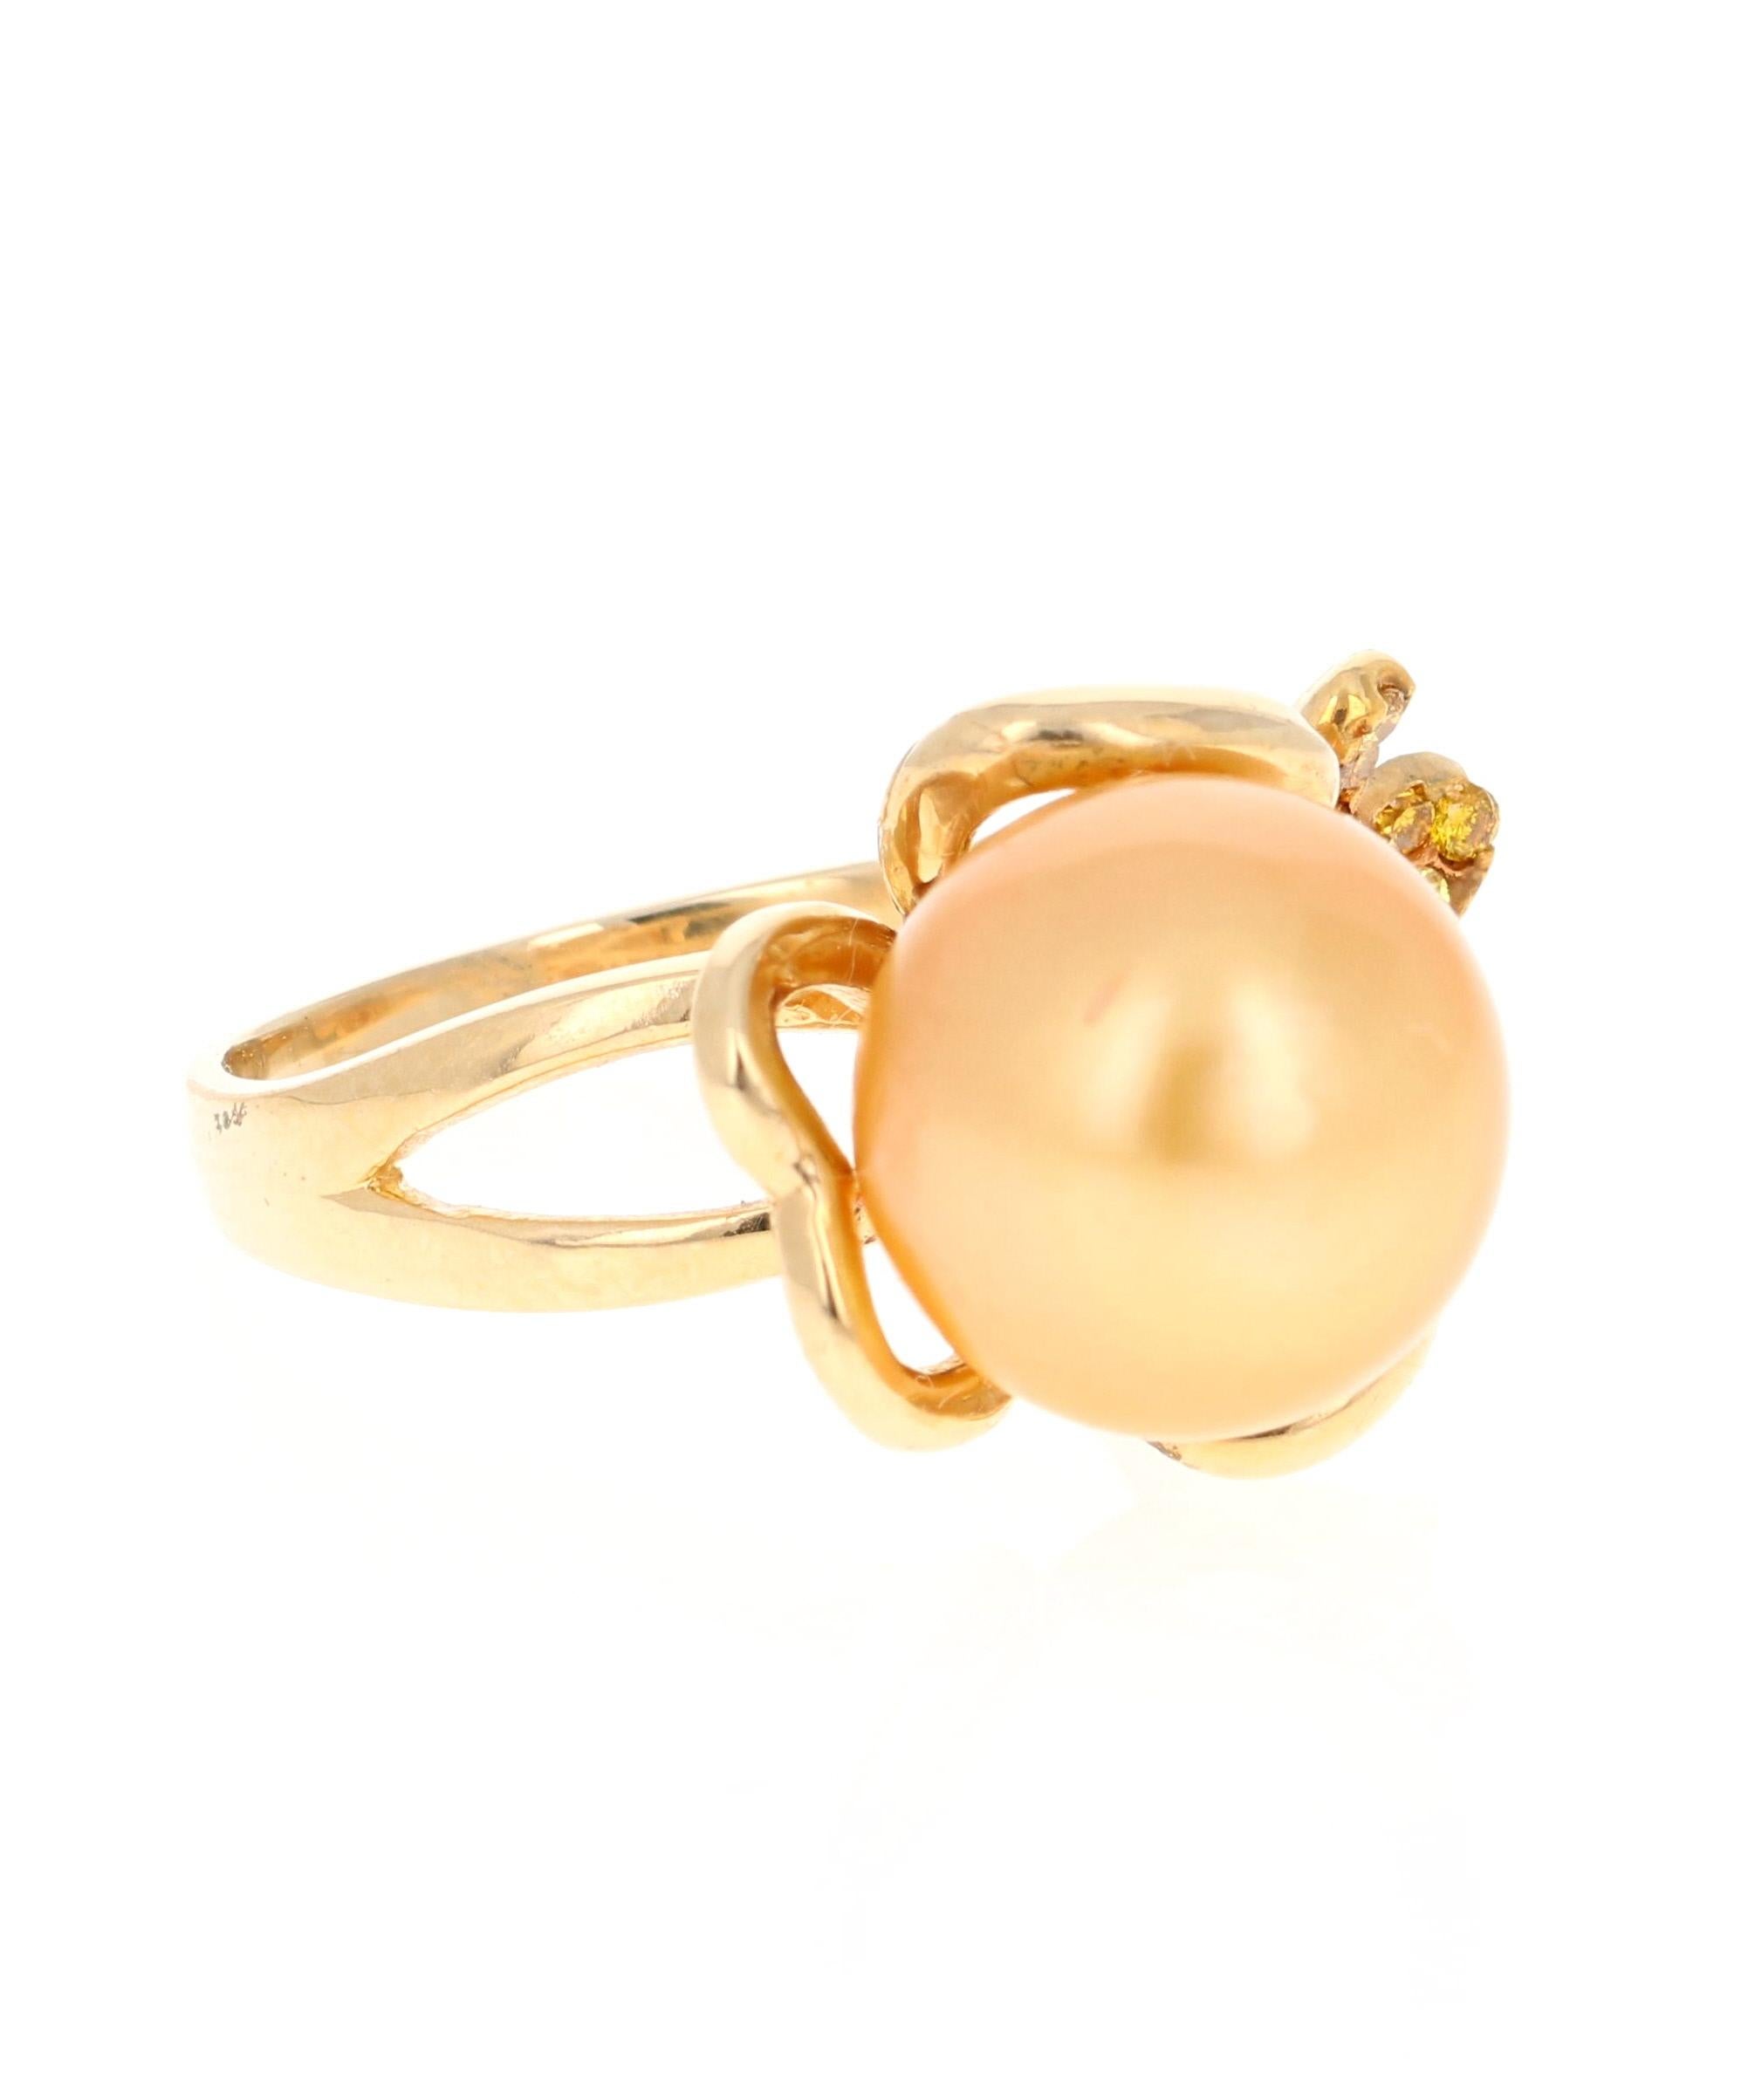 This one of a kind South Sea Pearl Ring will surely stand out in a crowd. It has a 9 mm Golden South Sea Pearl with 18 Round Cut Yellow Diamonds on the petals weighing 0.20 Carats. The yellow diamonds are natural and a fancy yellow color with the